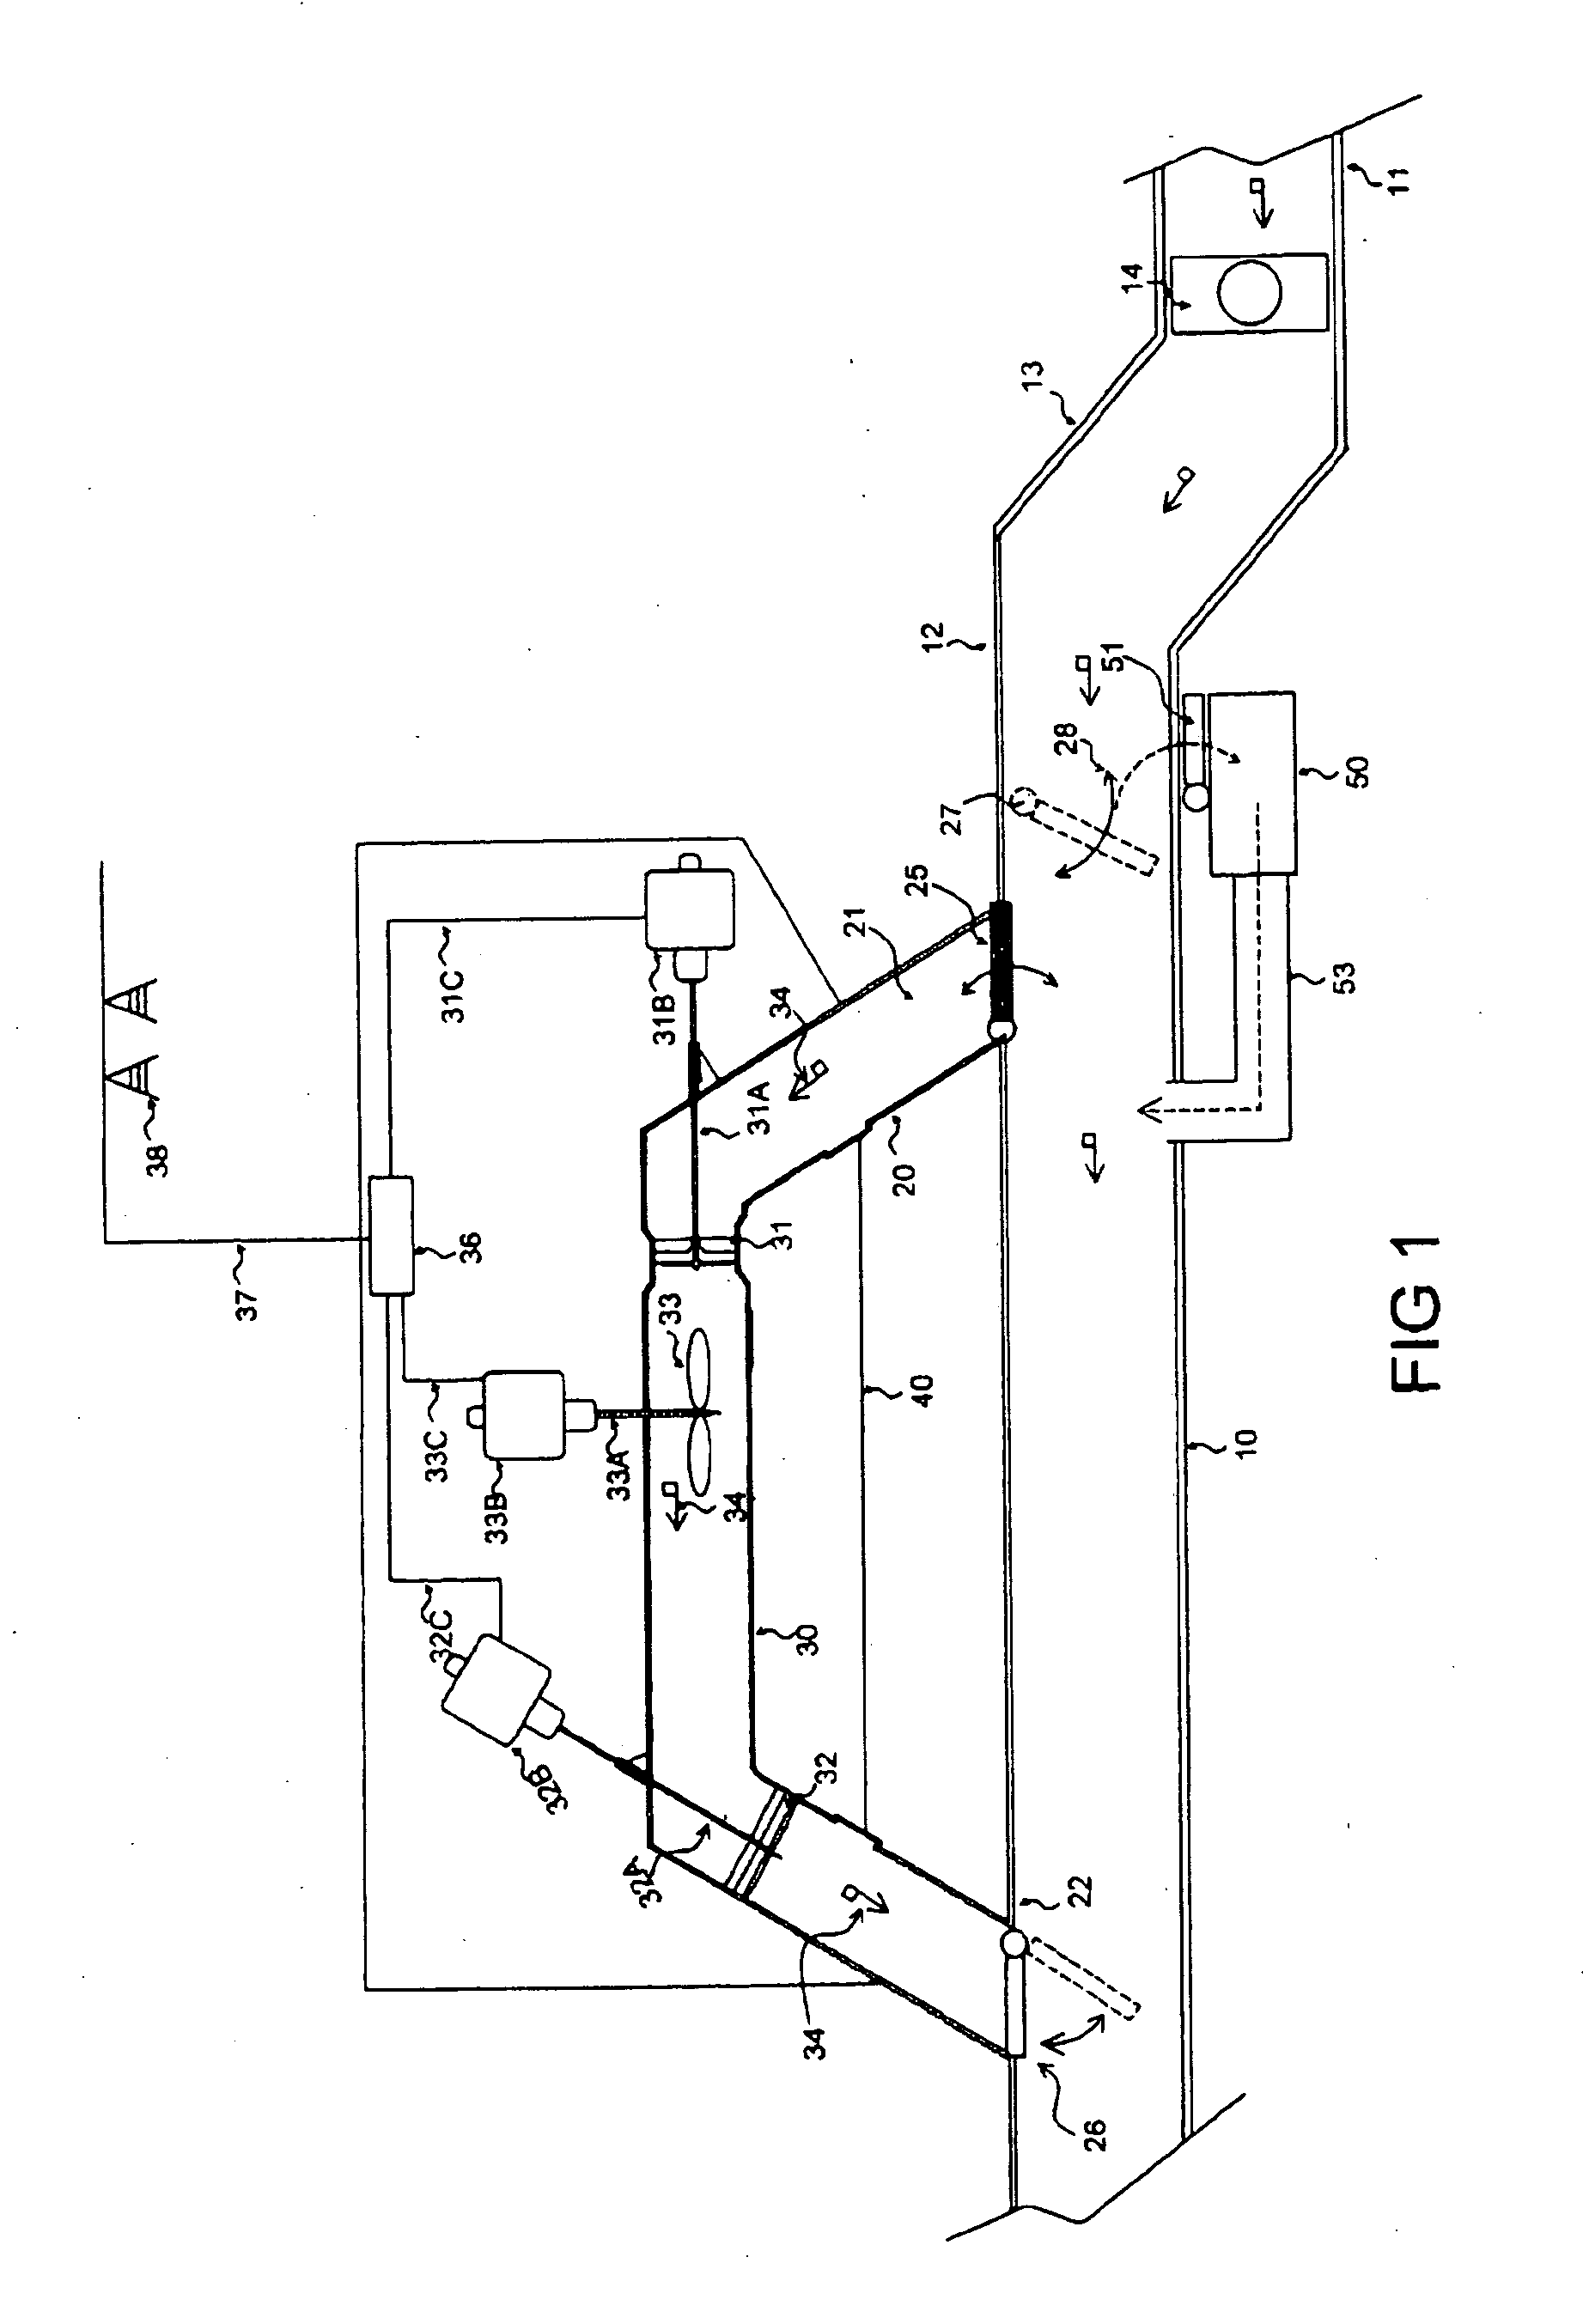 Waste Water Electrical Power Generating System